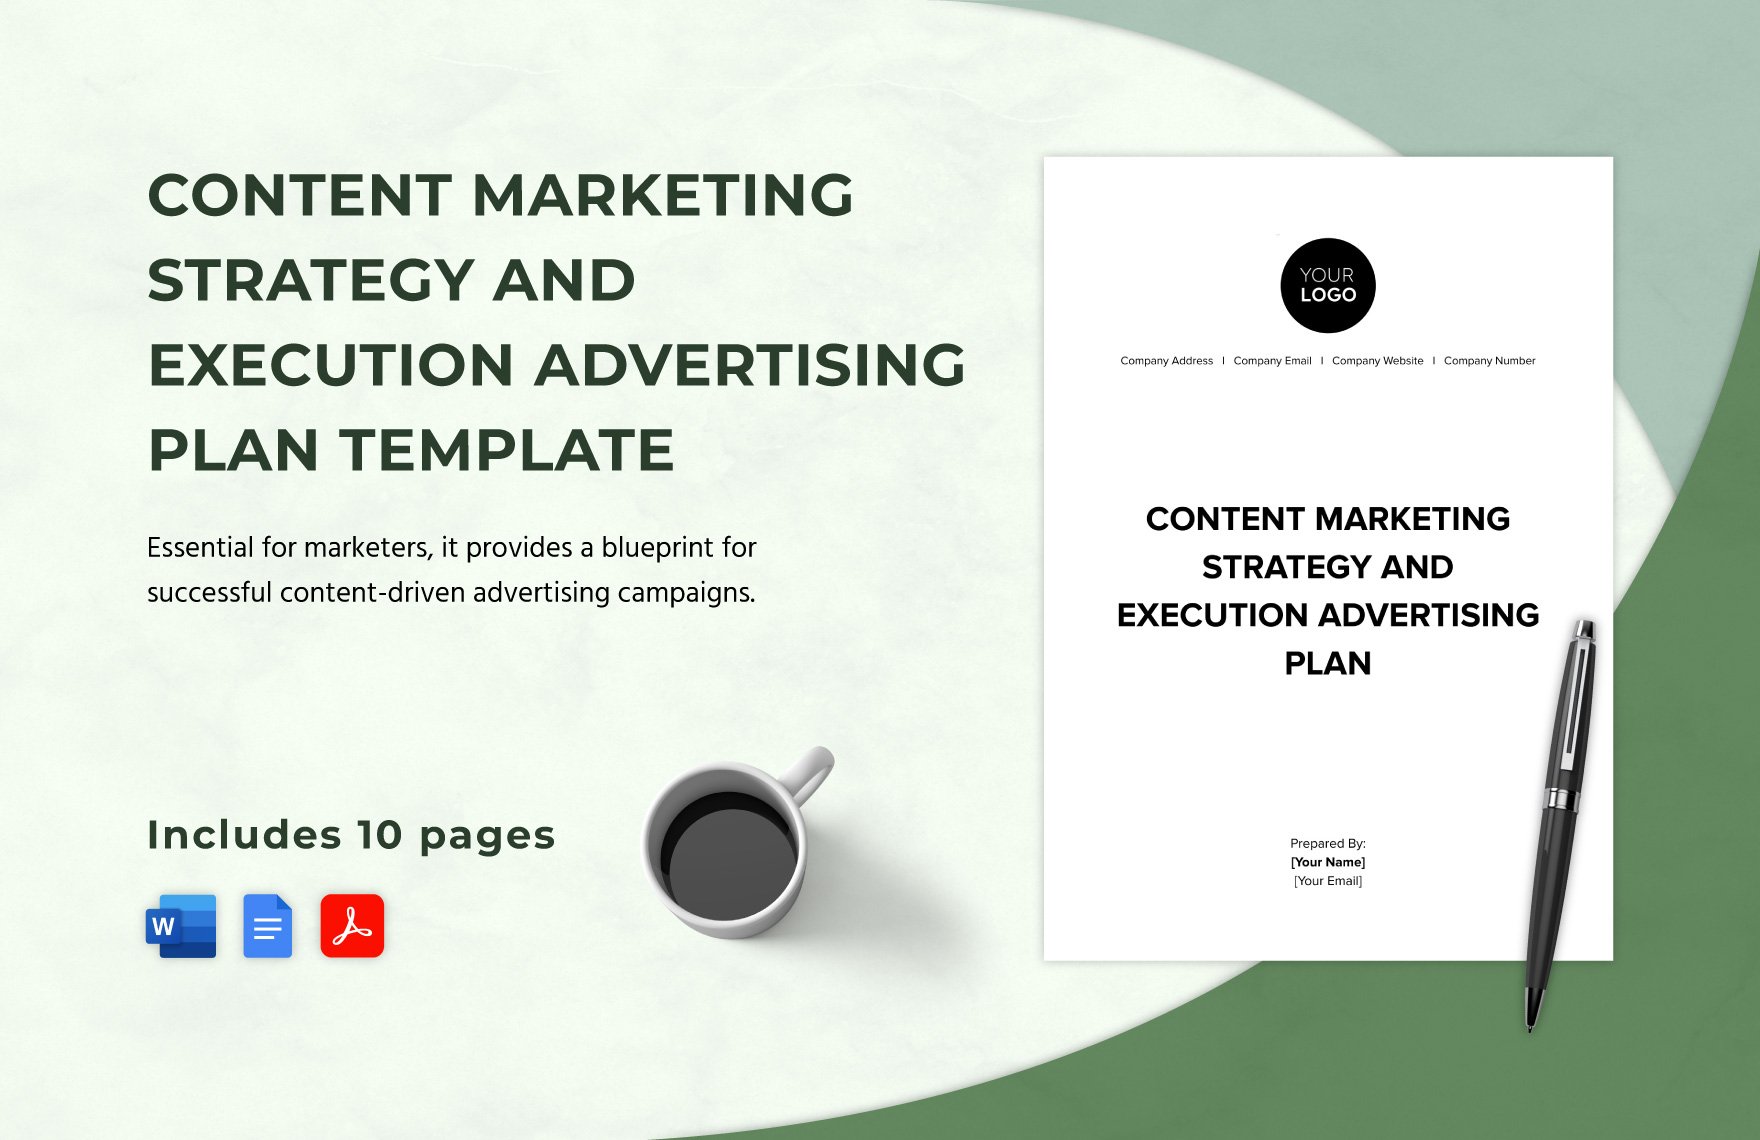 Content Marketing Strategy and Execution Advertising Plan Template